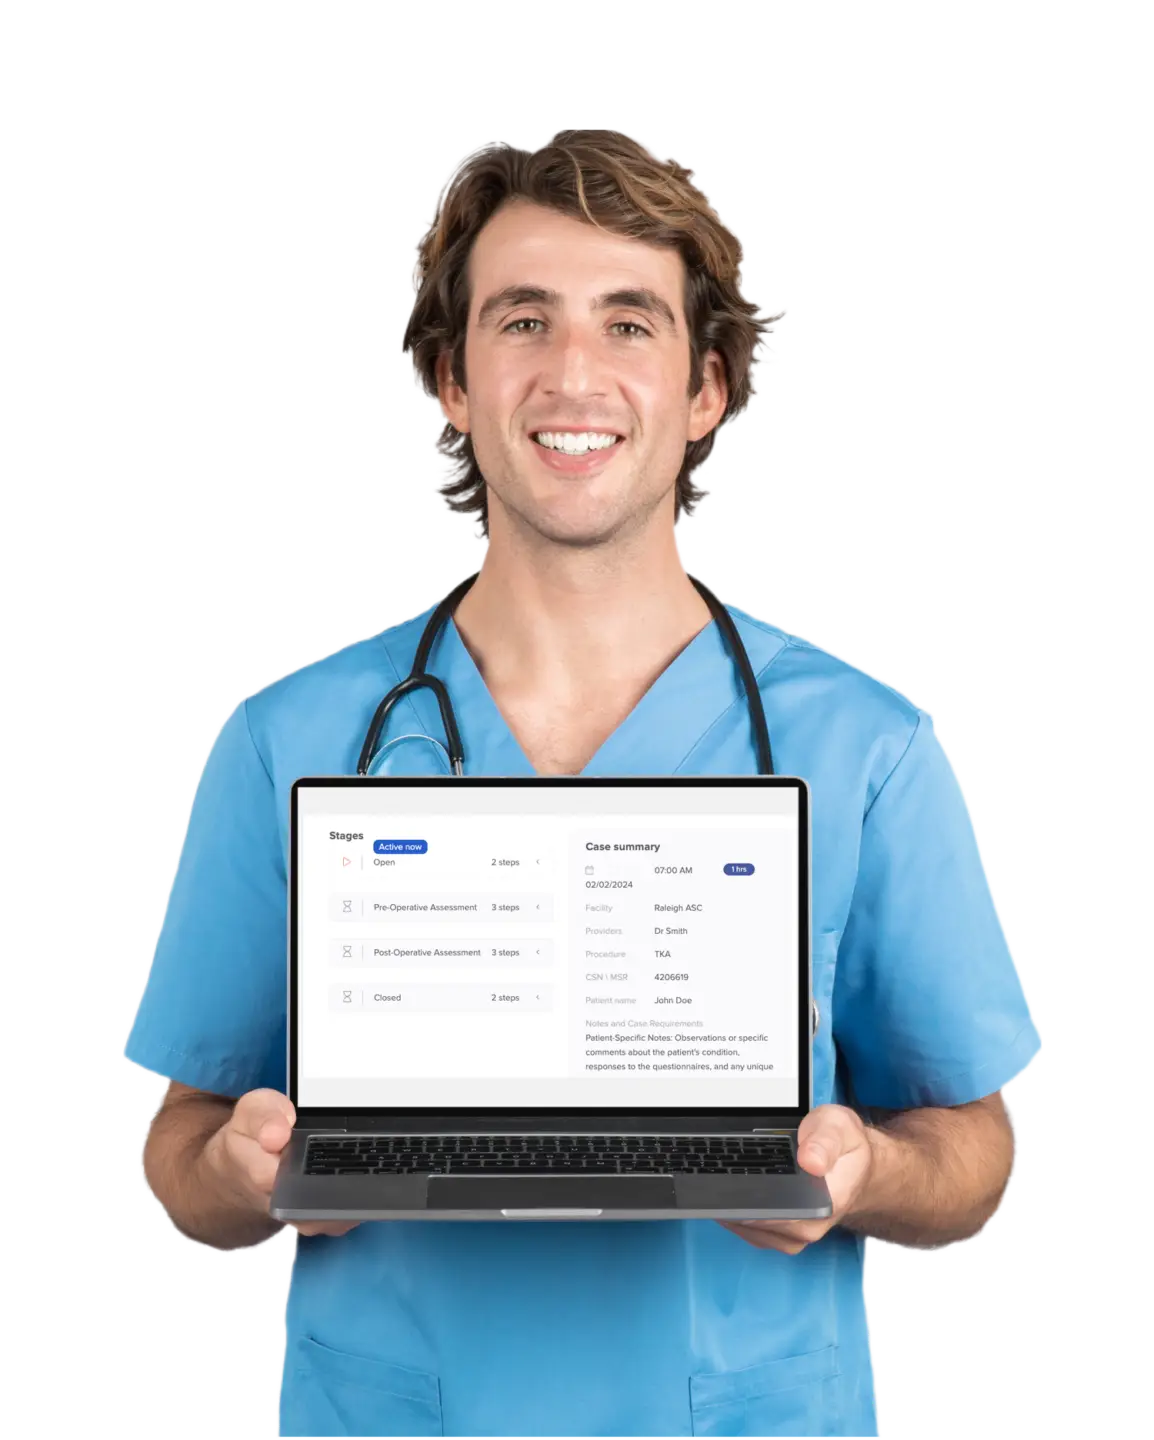 Nurse holding a computer, demonstrating HUB Healthcare's workflow capabilities and integrated healthcare solutions.